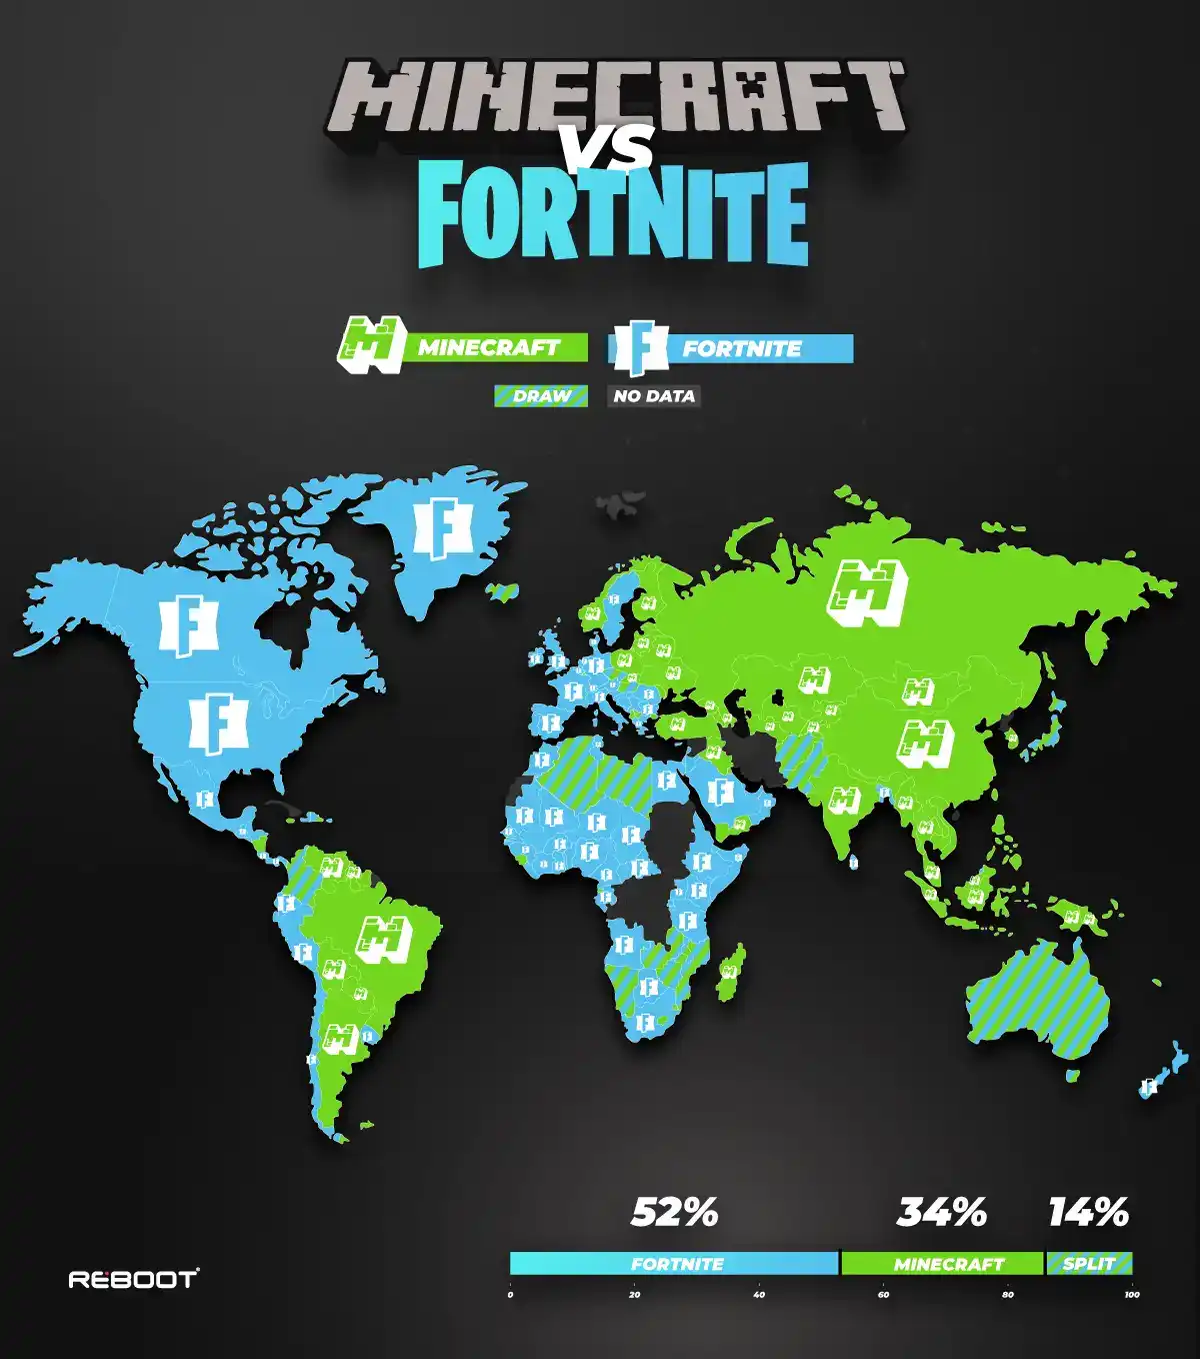 Roblox passes Minecraft and Fortnite as world's favourite video game